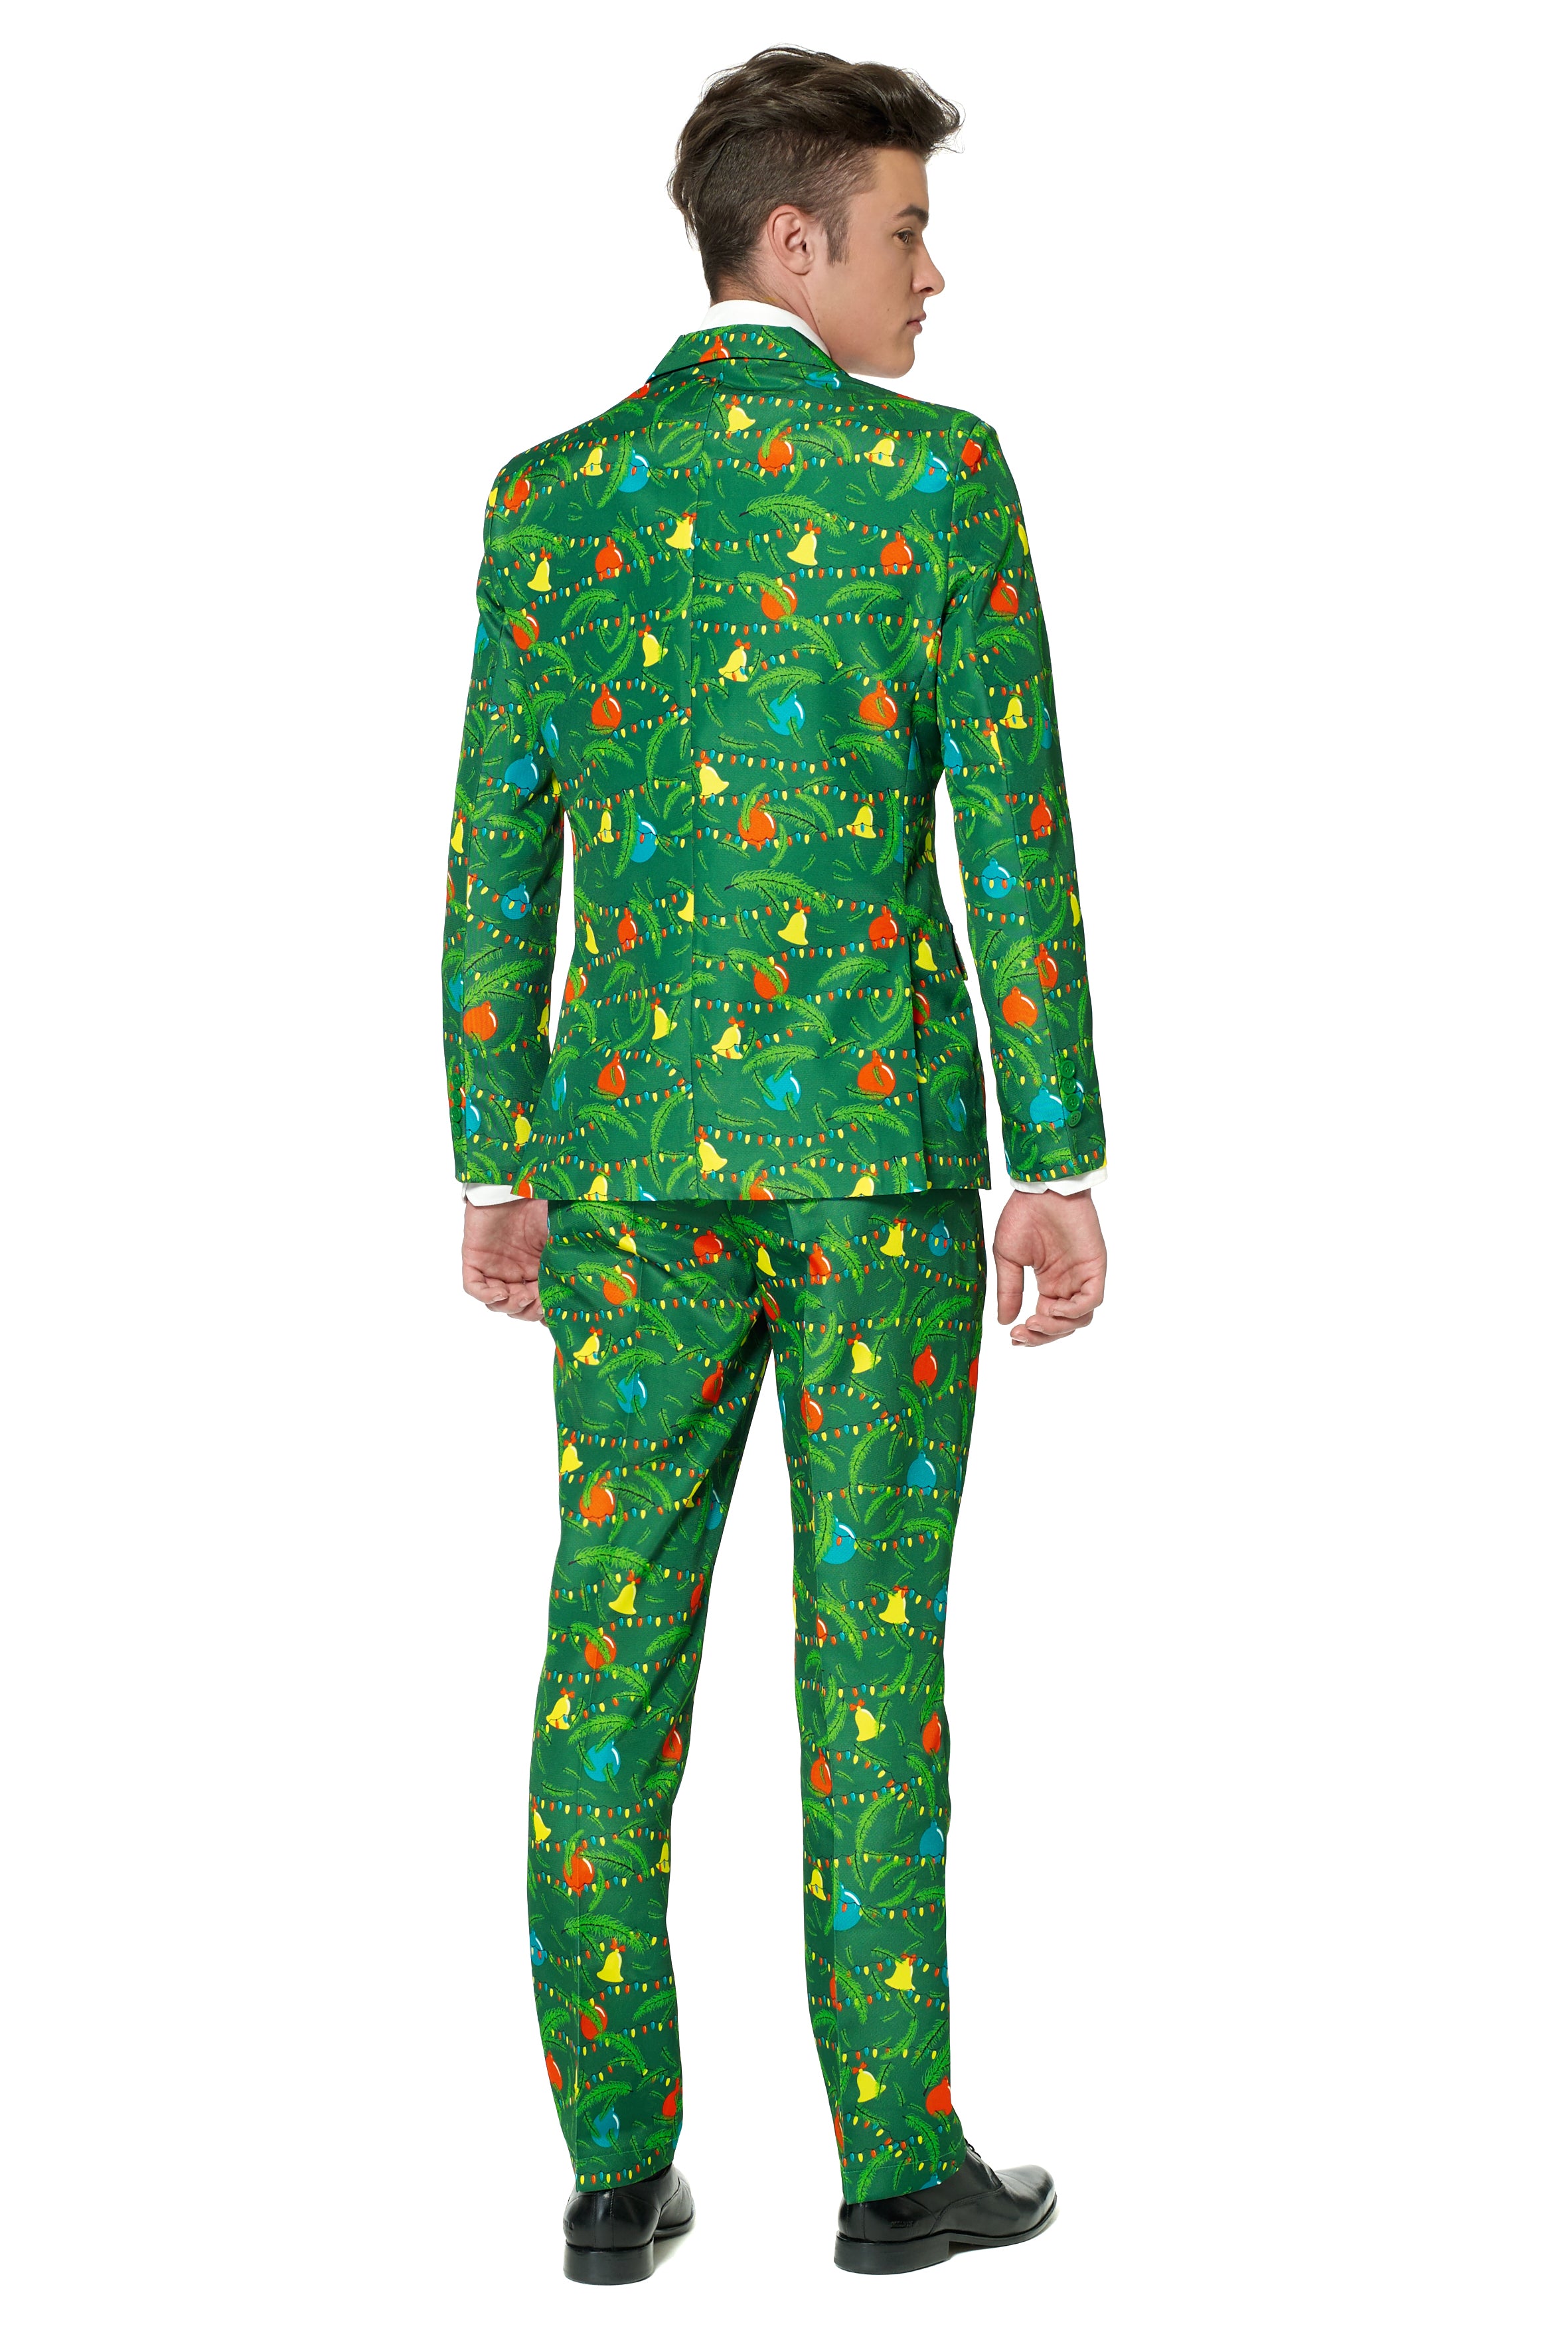 Costume Suitmeister Christmas Green Tree